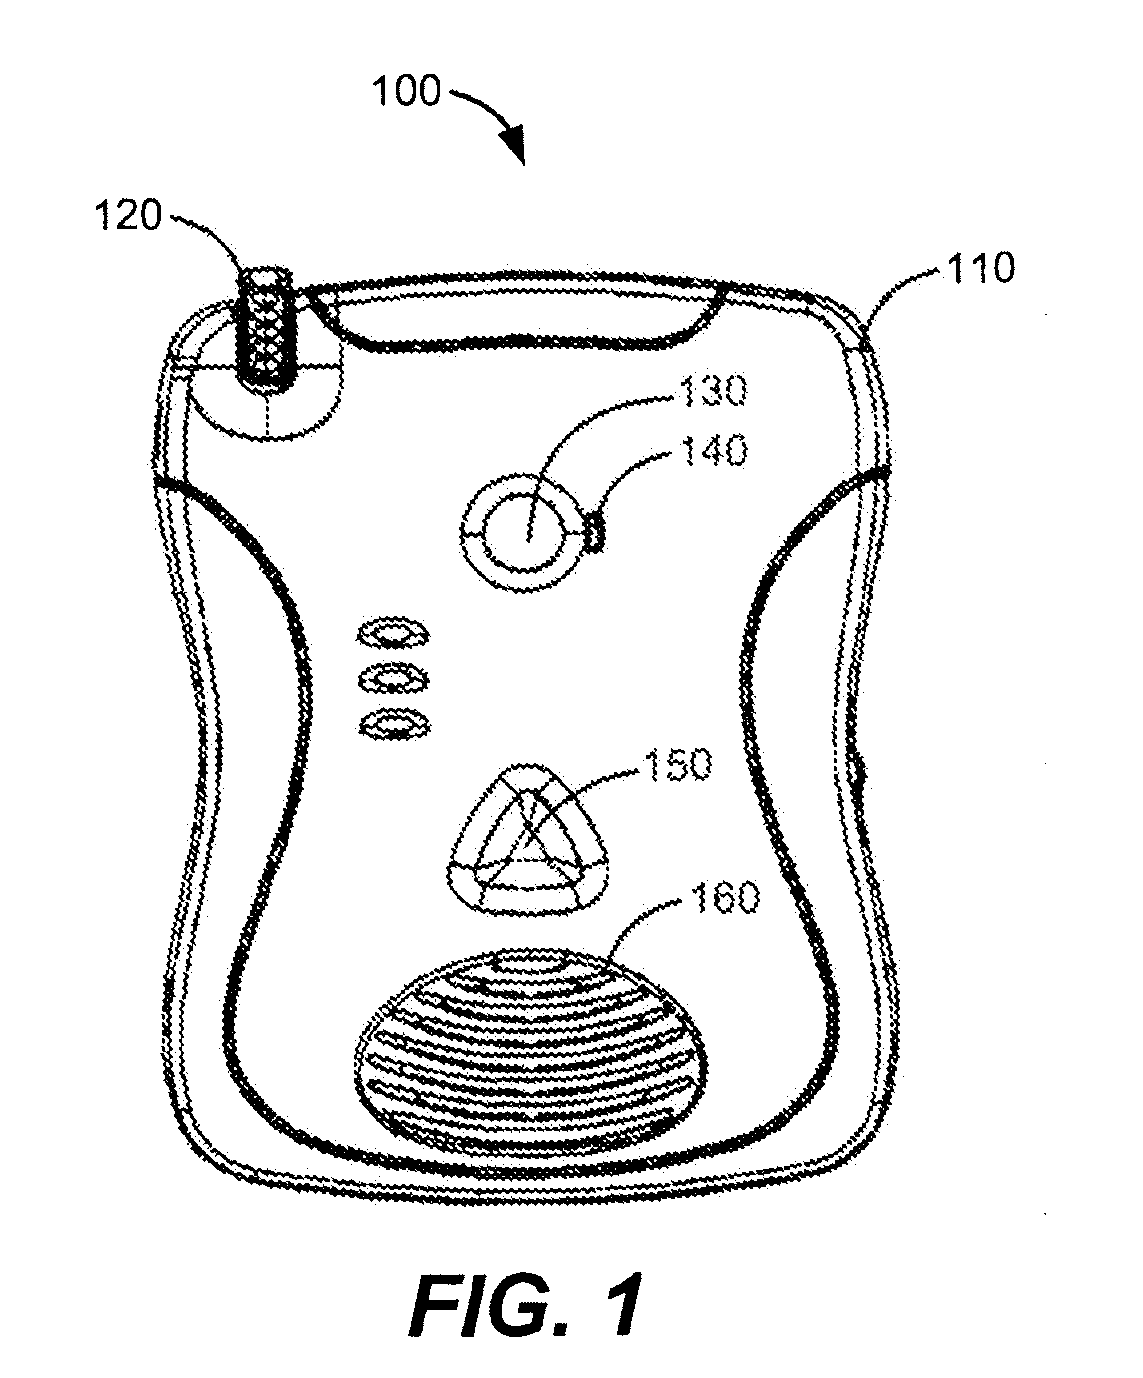 System and Method for Effectively Indicating Element Failure or a Preventive Maintenance Condition in an Automatic External Defibrillator (AED)